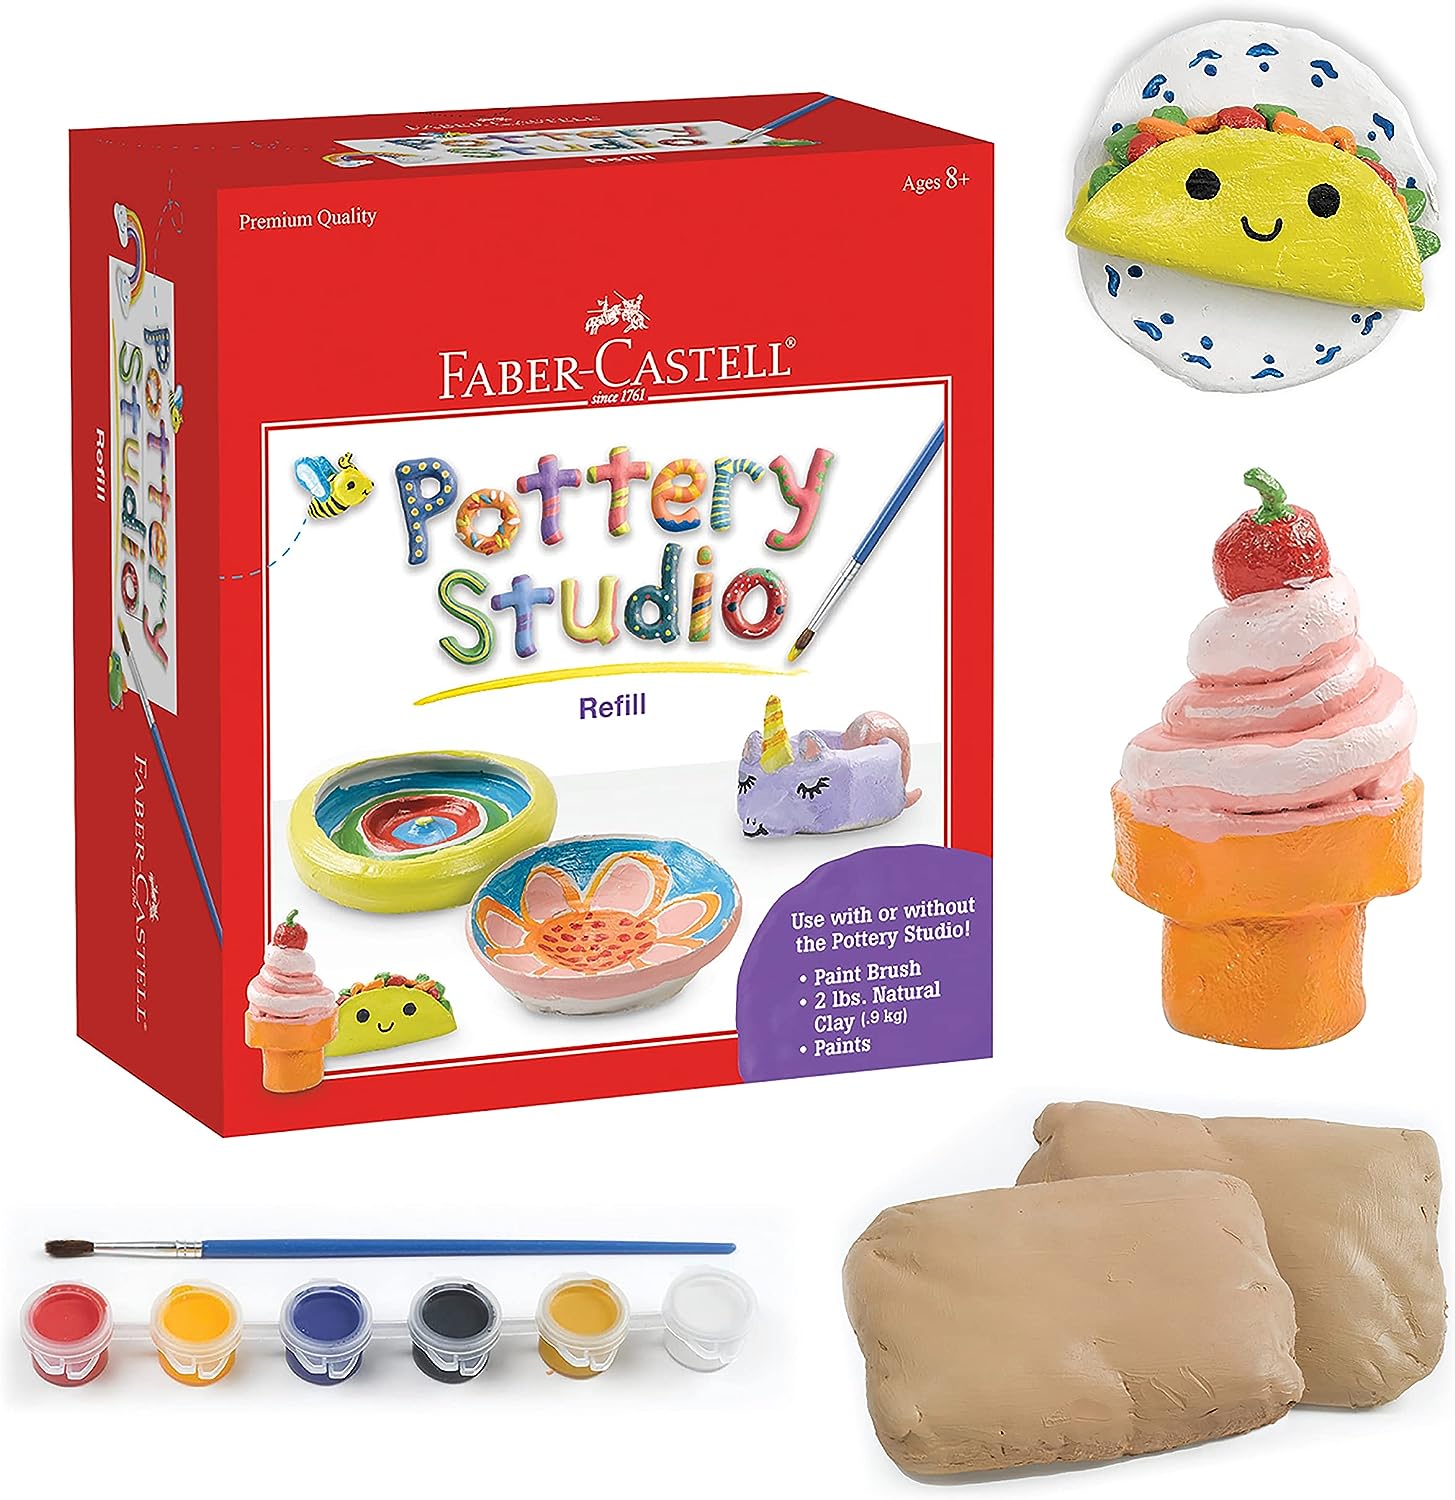 Faber-Castell Pottery Studio Refill Kit - 2 lbs. of [...]